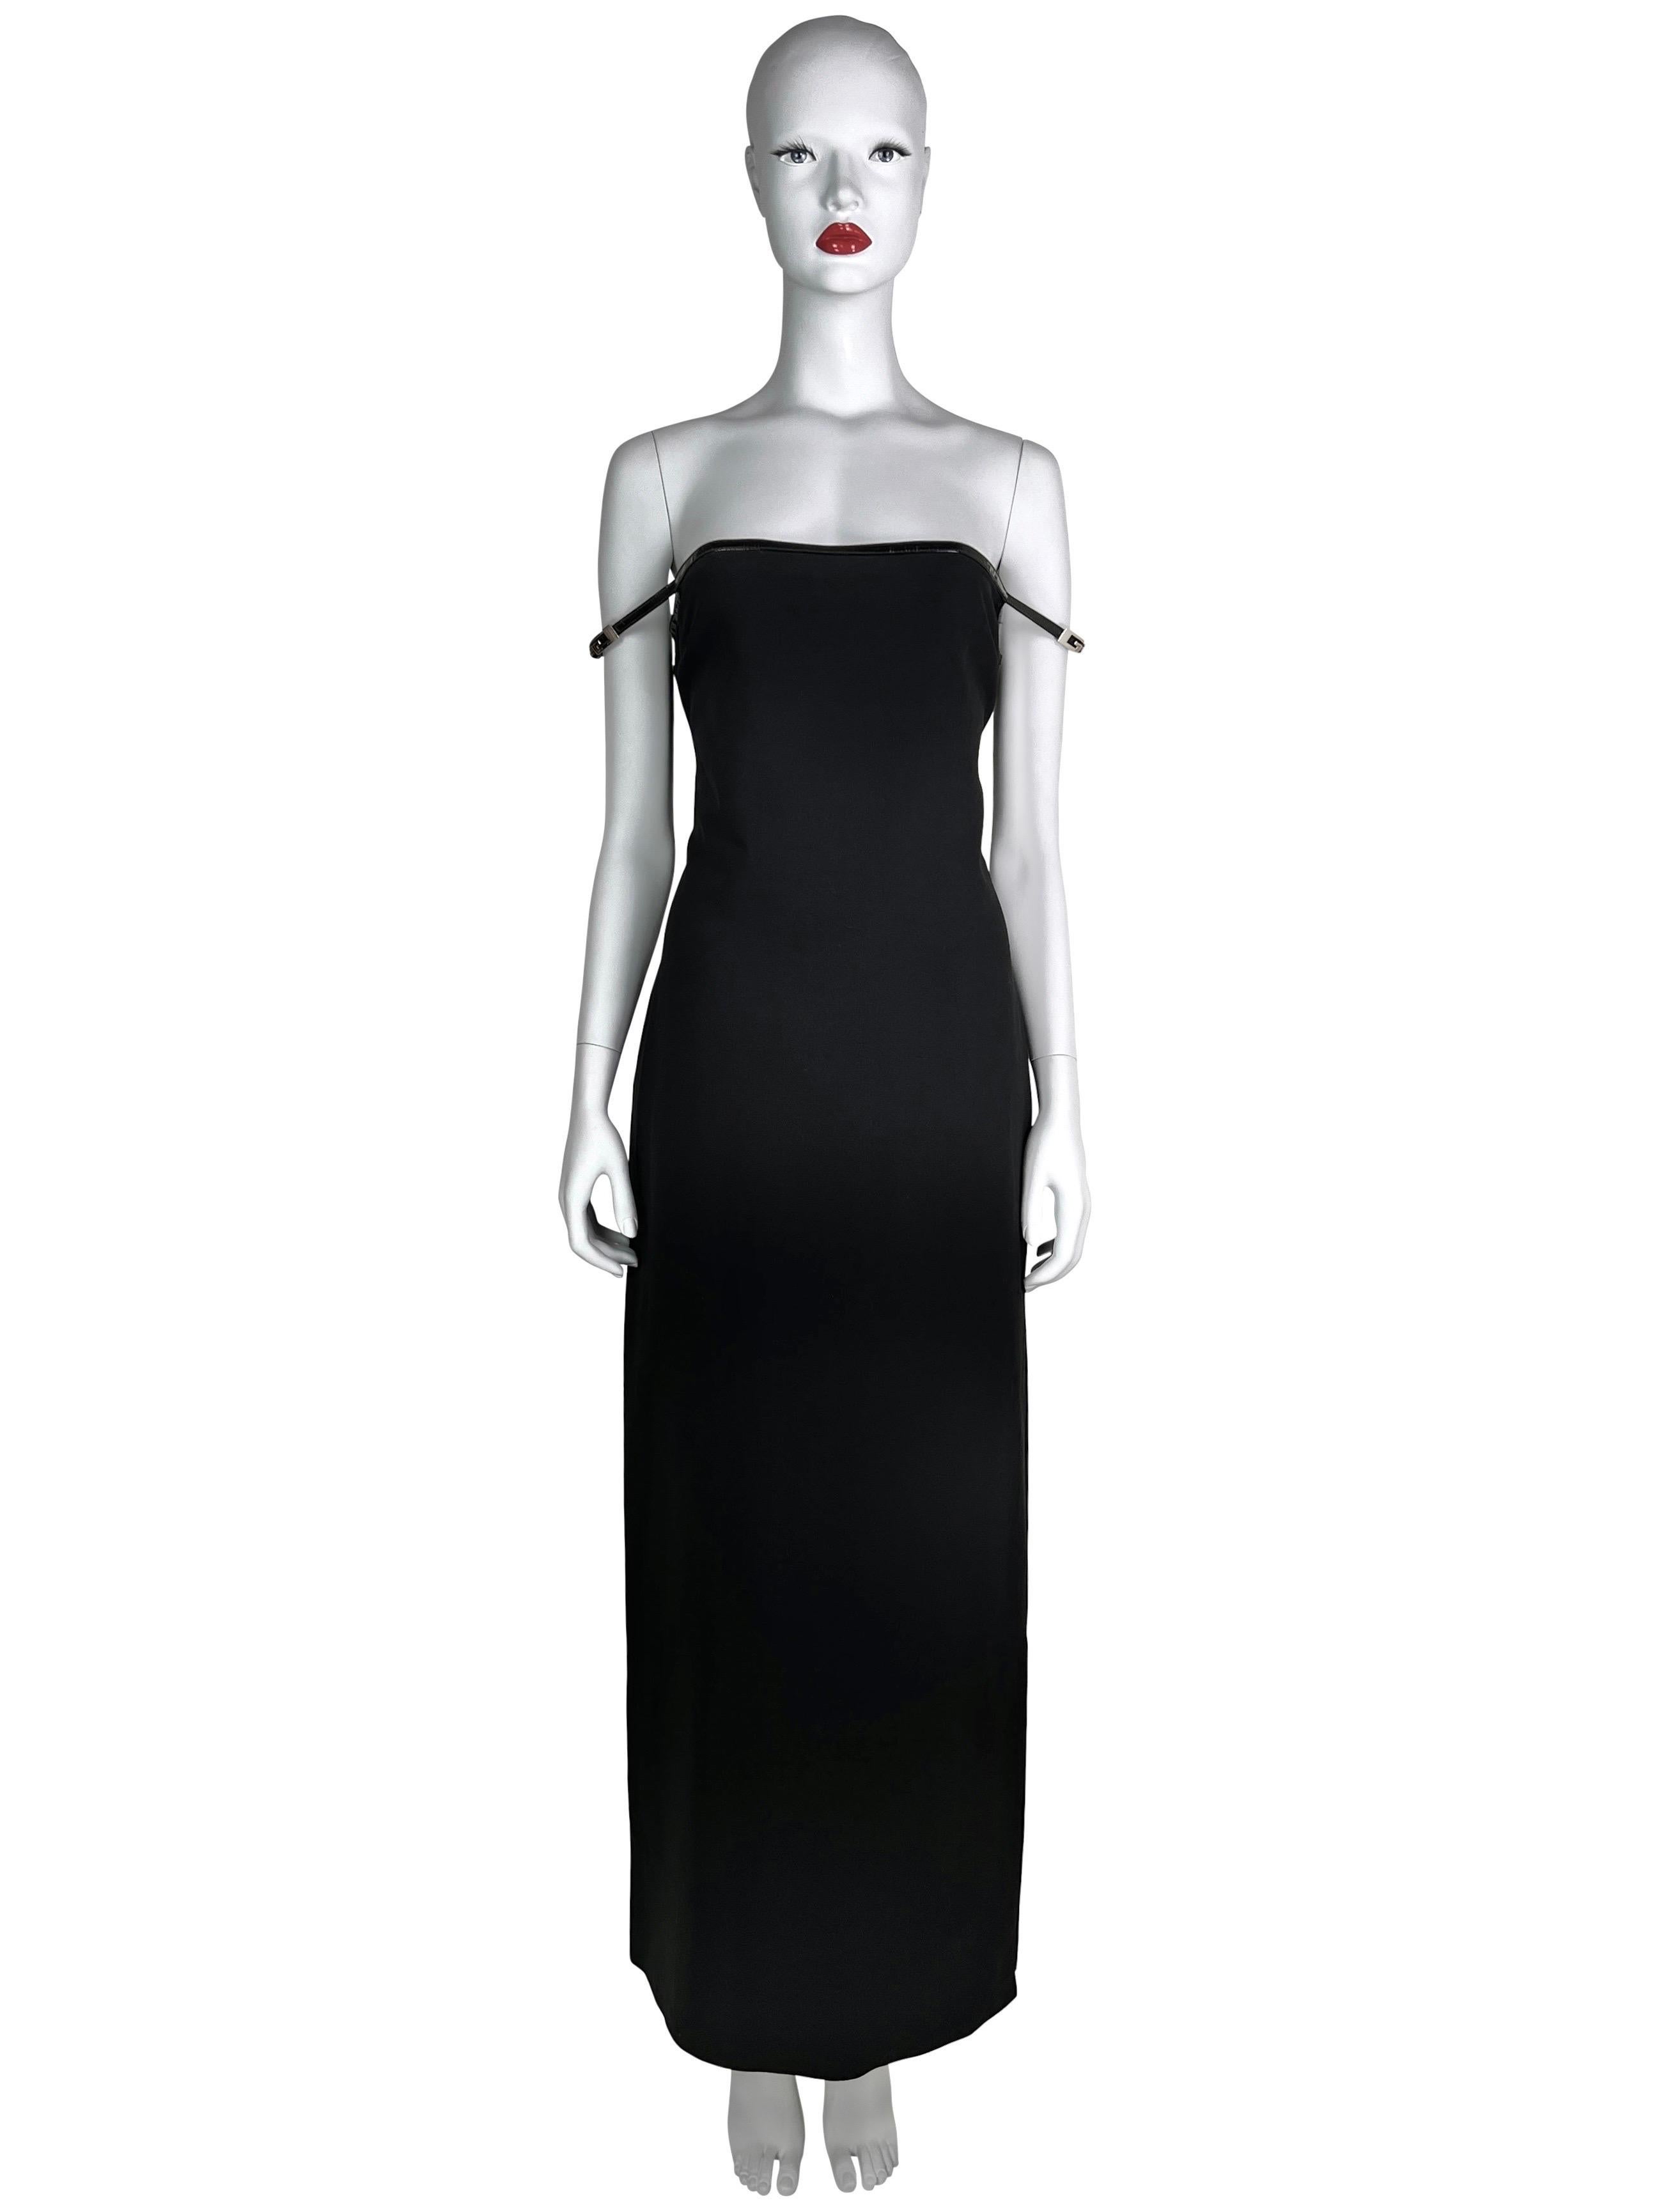 Gucci by Tom Ford Fall 1997 G-logo Strap Evening Black Dress In Good Condition For Sale In Prague, CZ